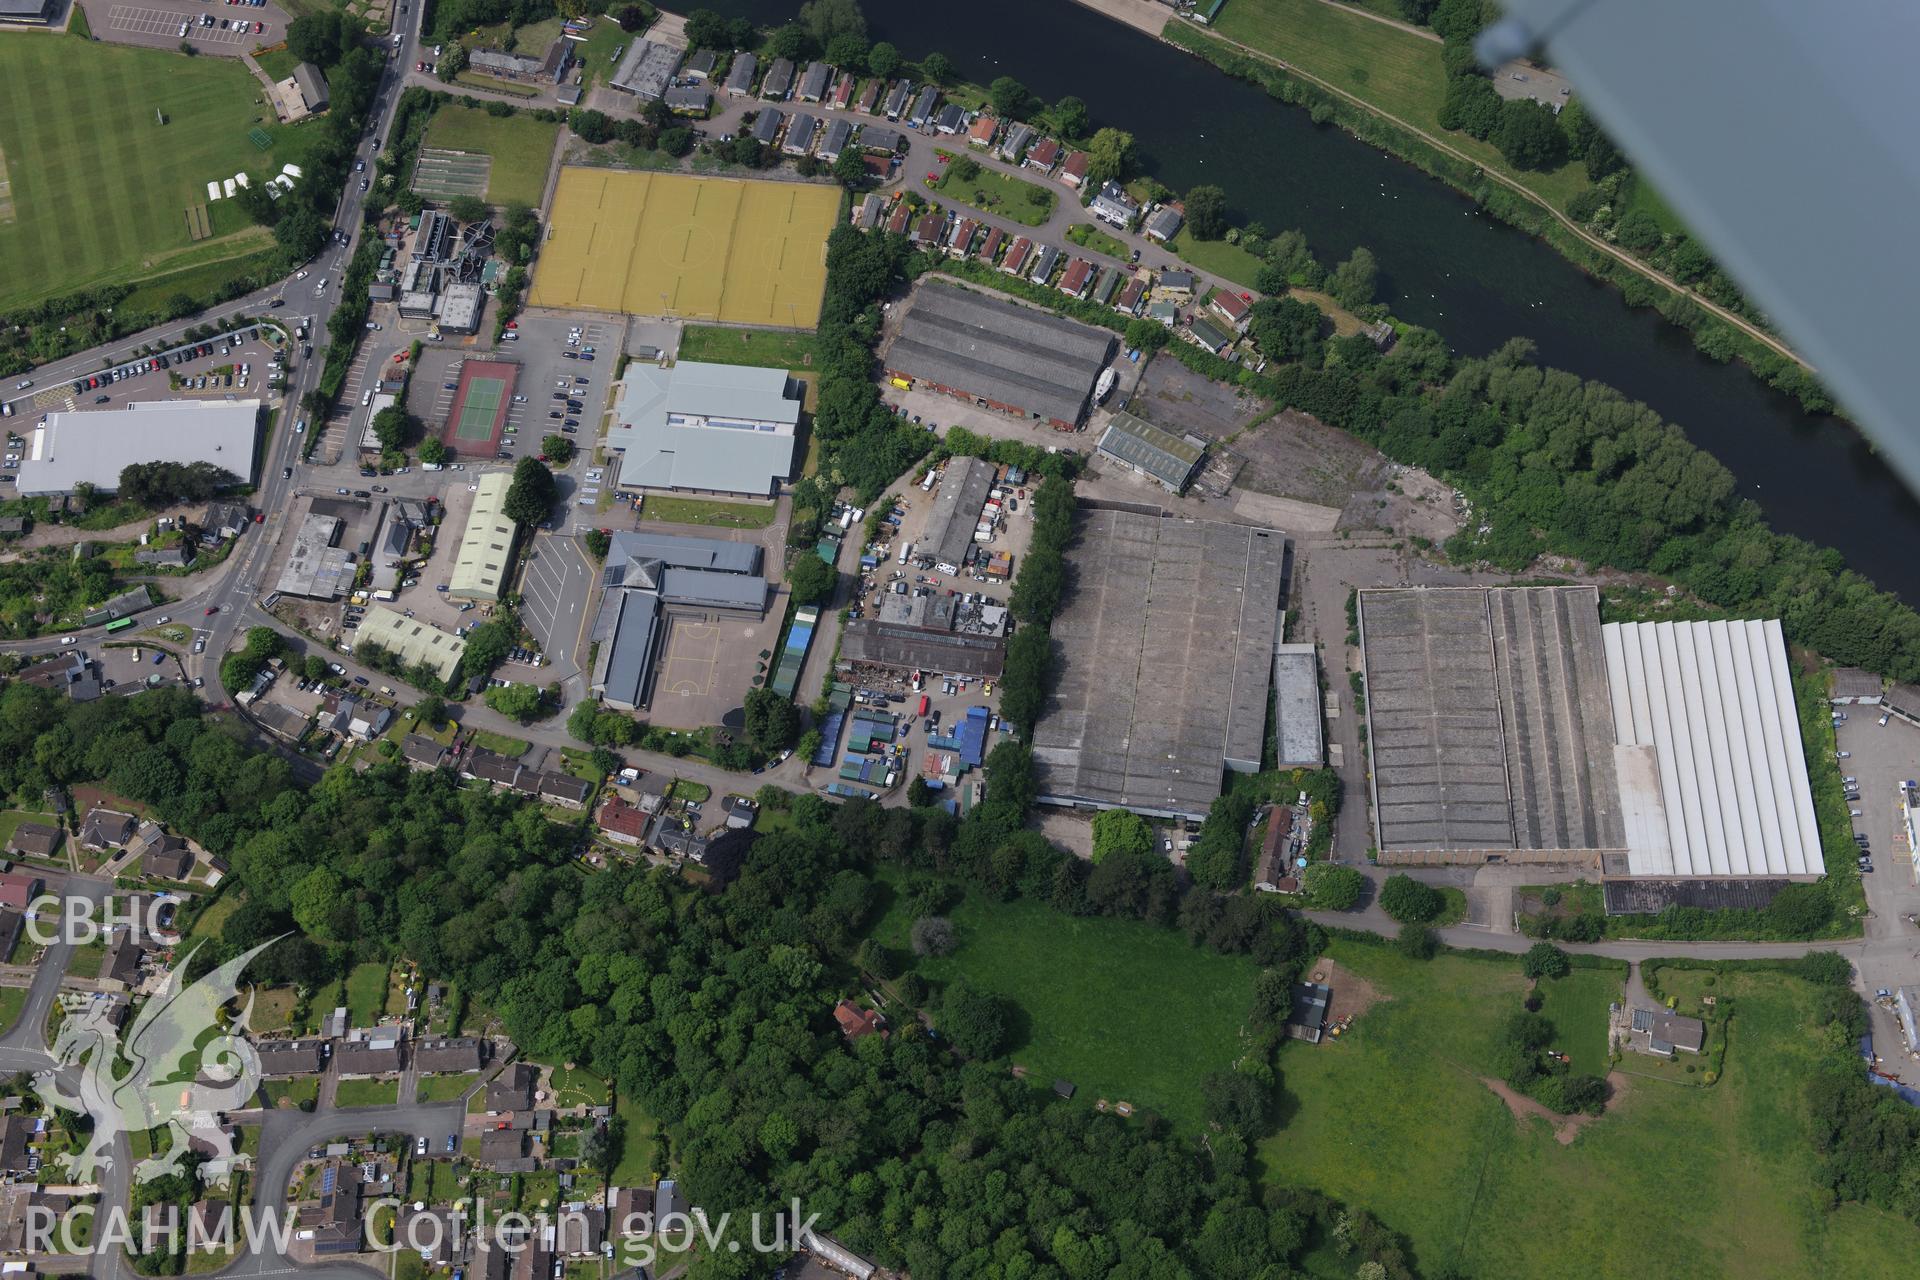 Monmouth School Sports Club on Hadnock Road Industrial Estate. Oblique aerial photograph taken during the Royal Commission's programme of archaeological aerial reconnaissance by Toby Driver on 11th June 2015.